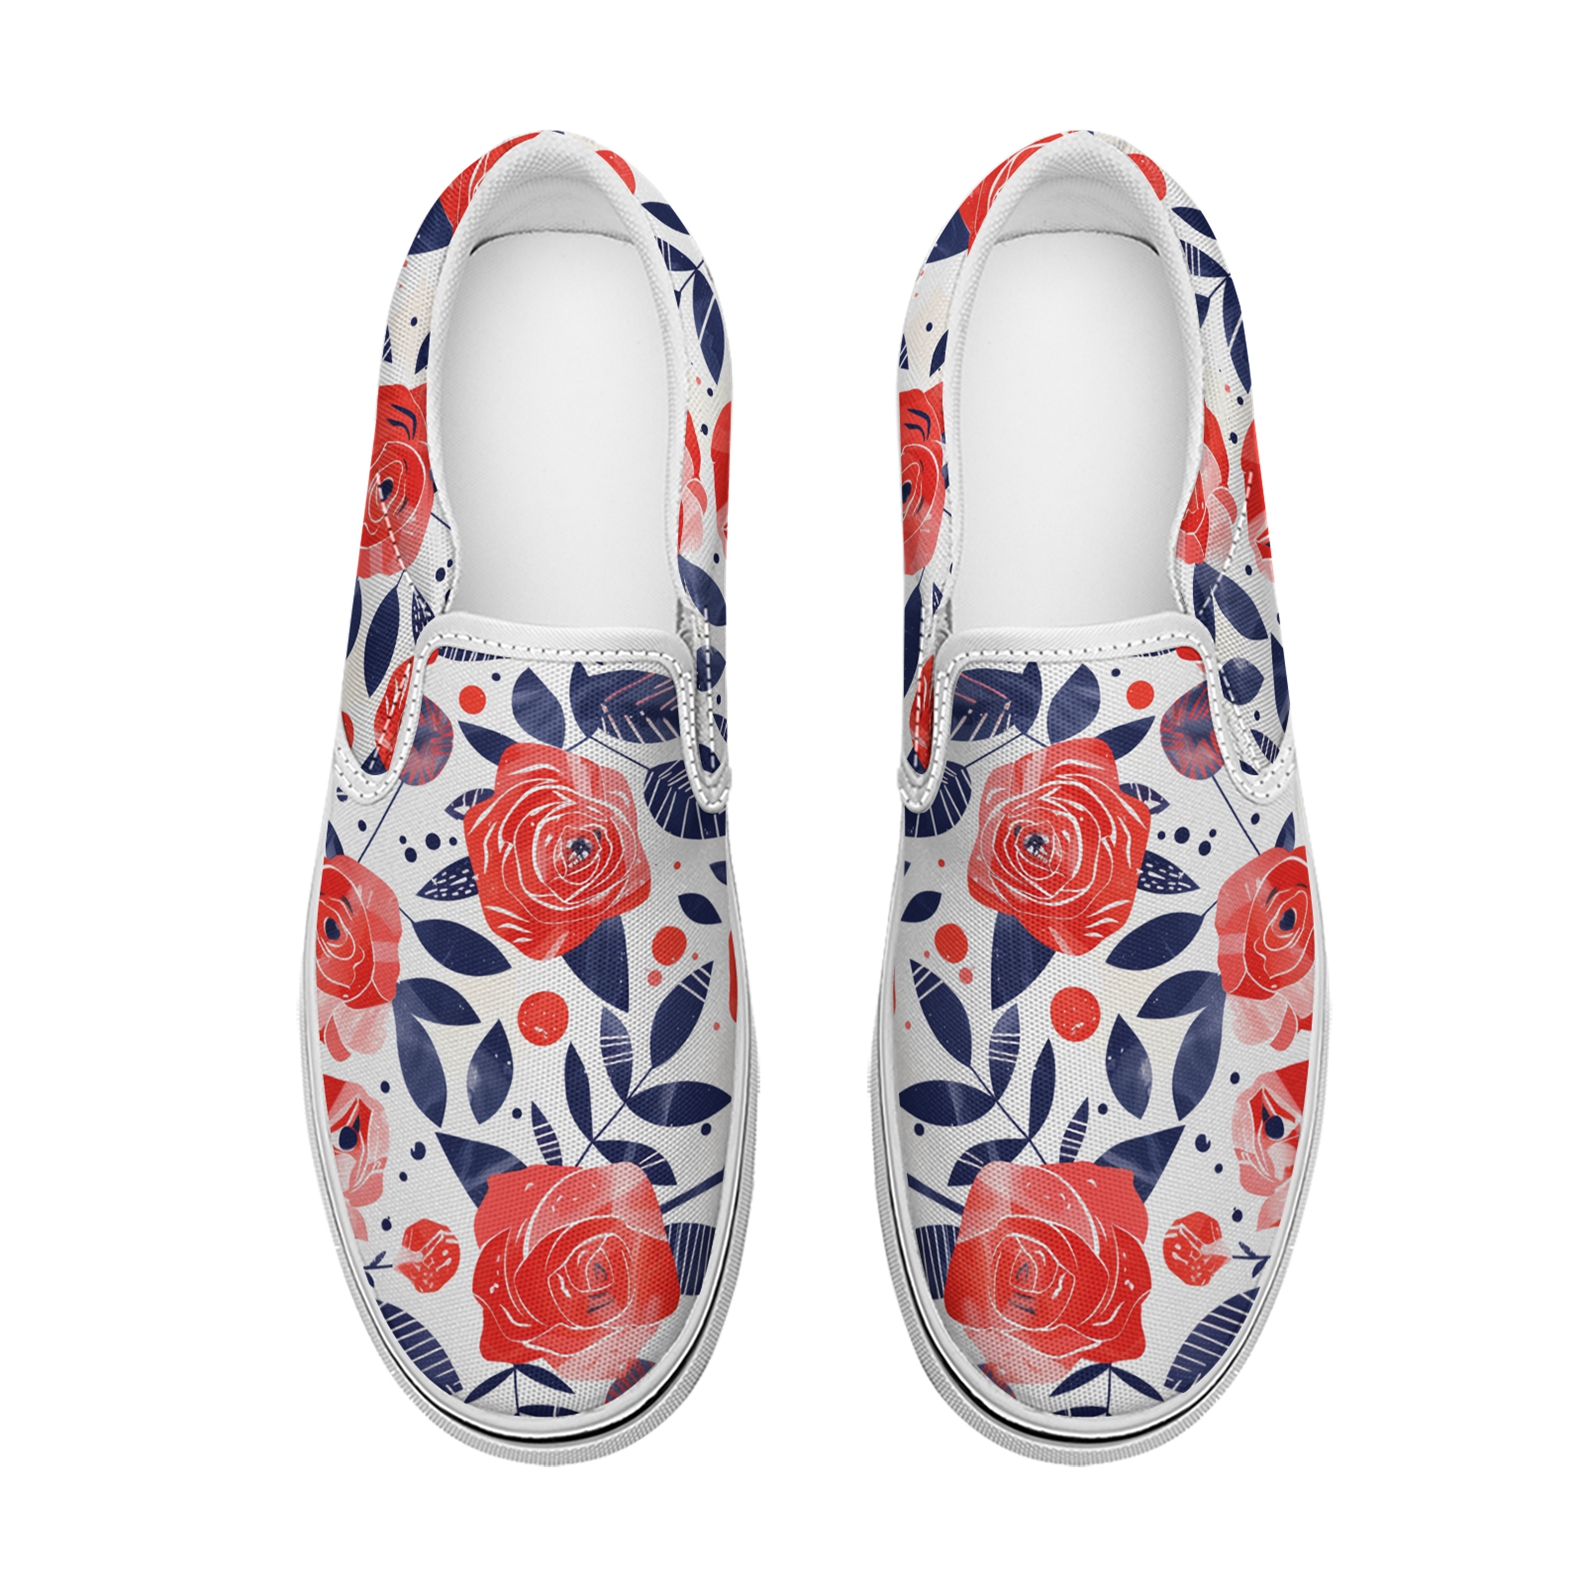 Women's fashion art rose print pattern flat canvas slippers casual shoes light and comfortable travel shoes